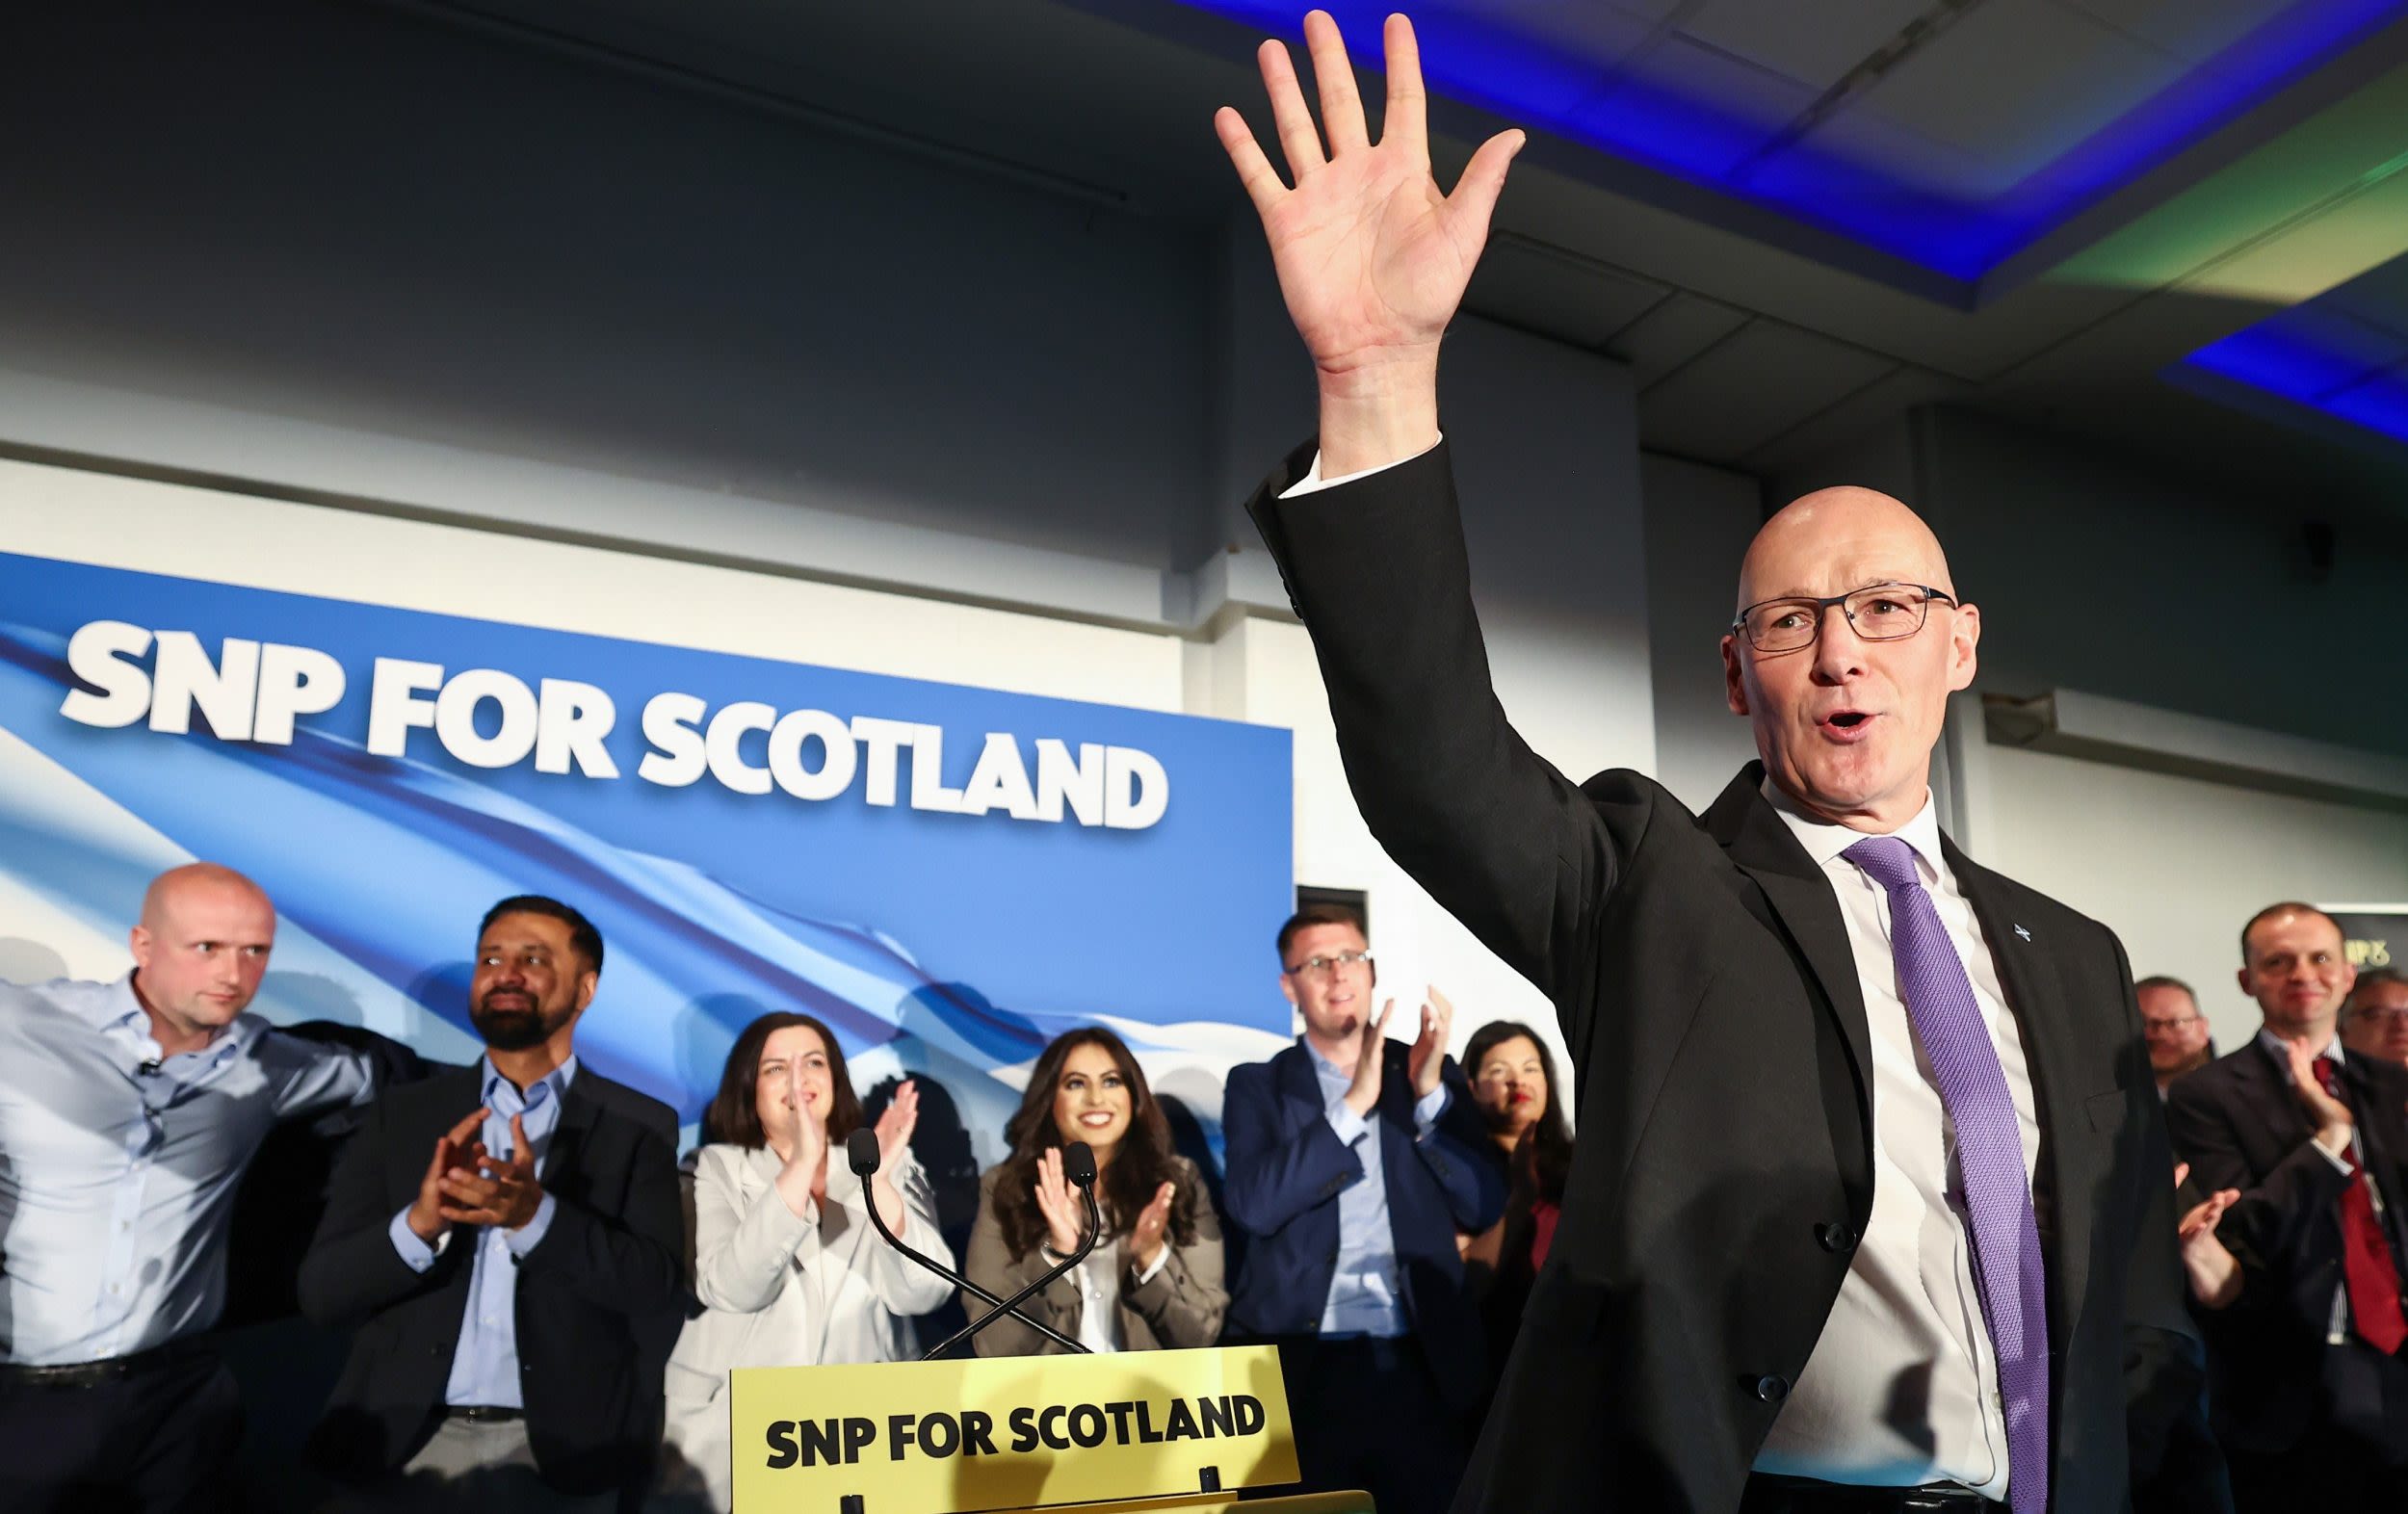 The SNP has finally admitted it has nothing left to offer Scotland